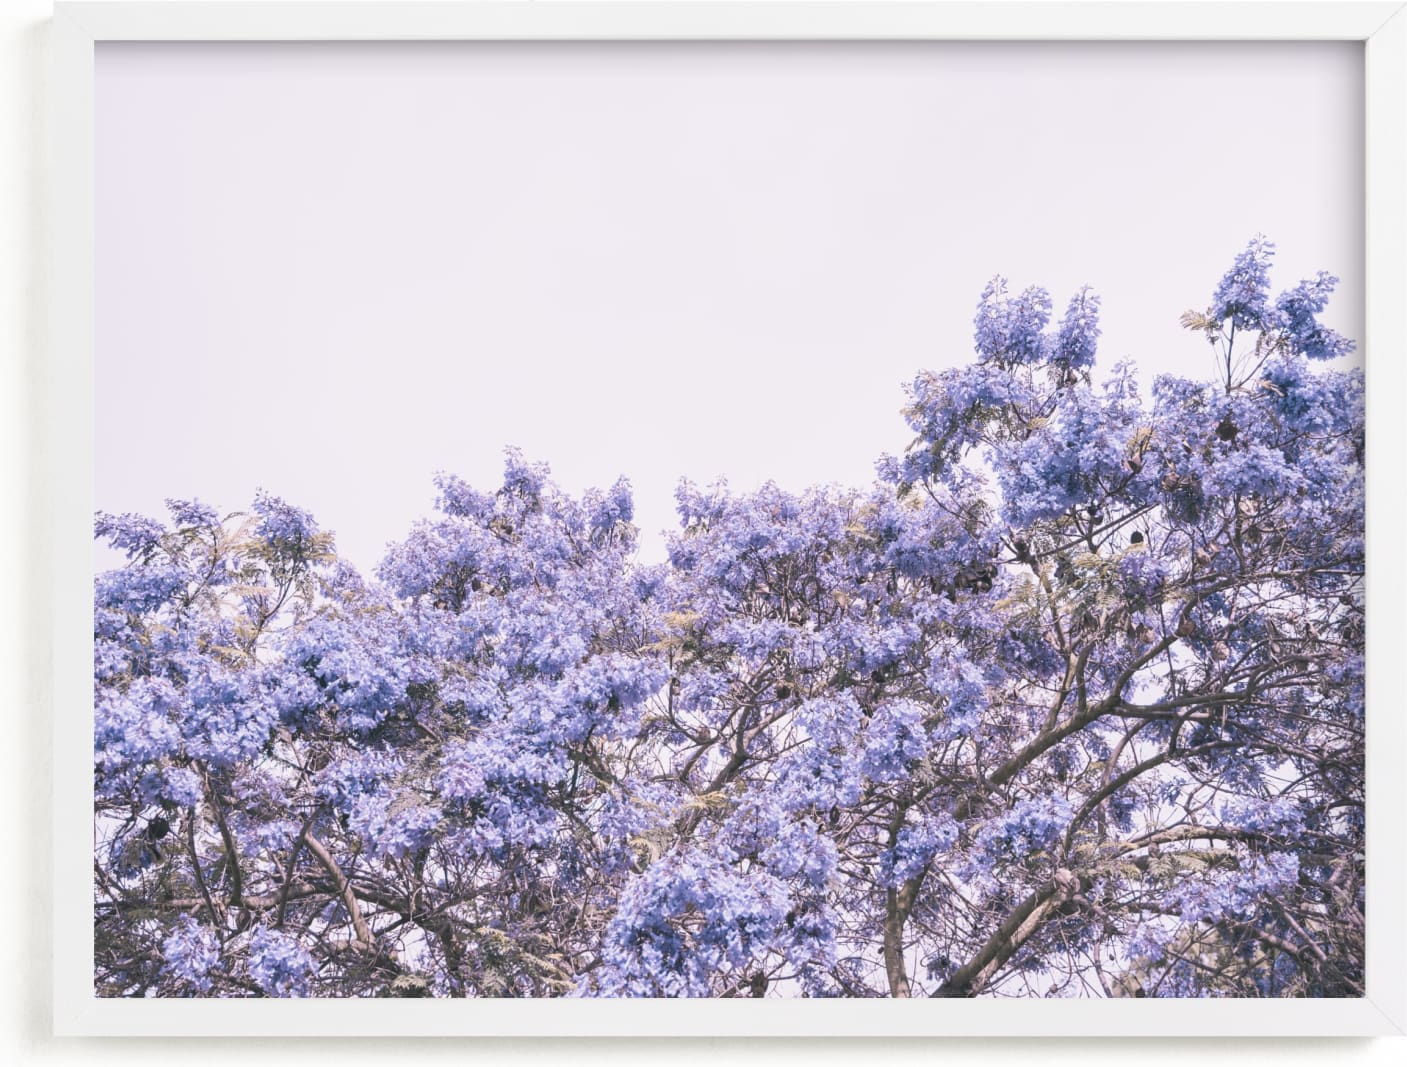 This is a purple, white art by Owl and Toad called Jacaranda in bloom.